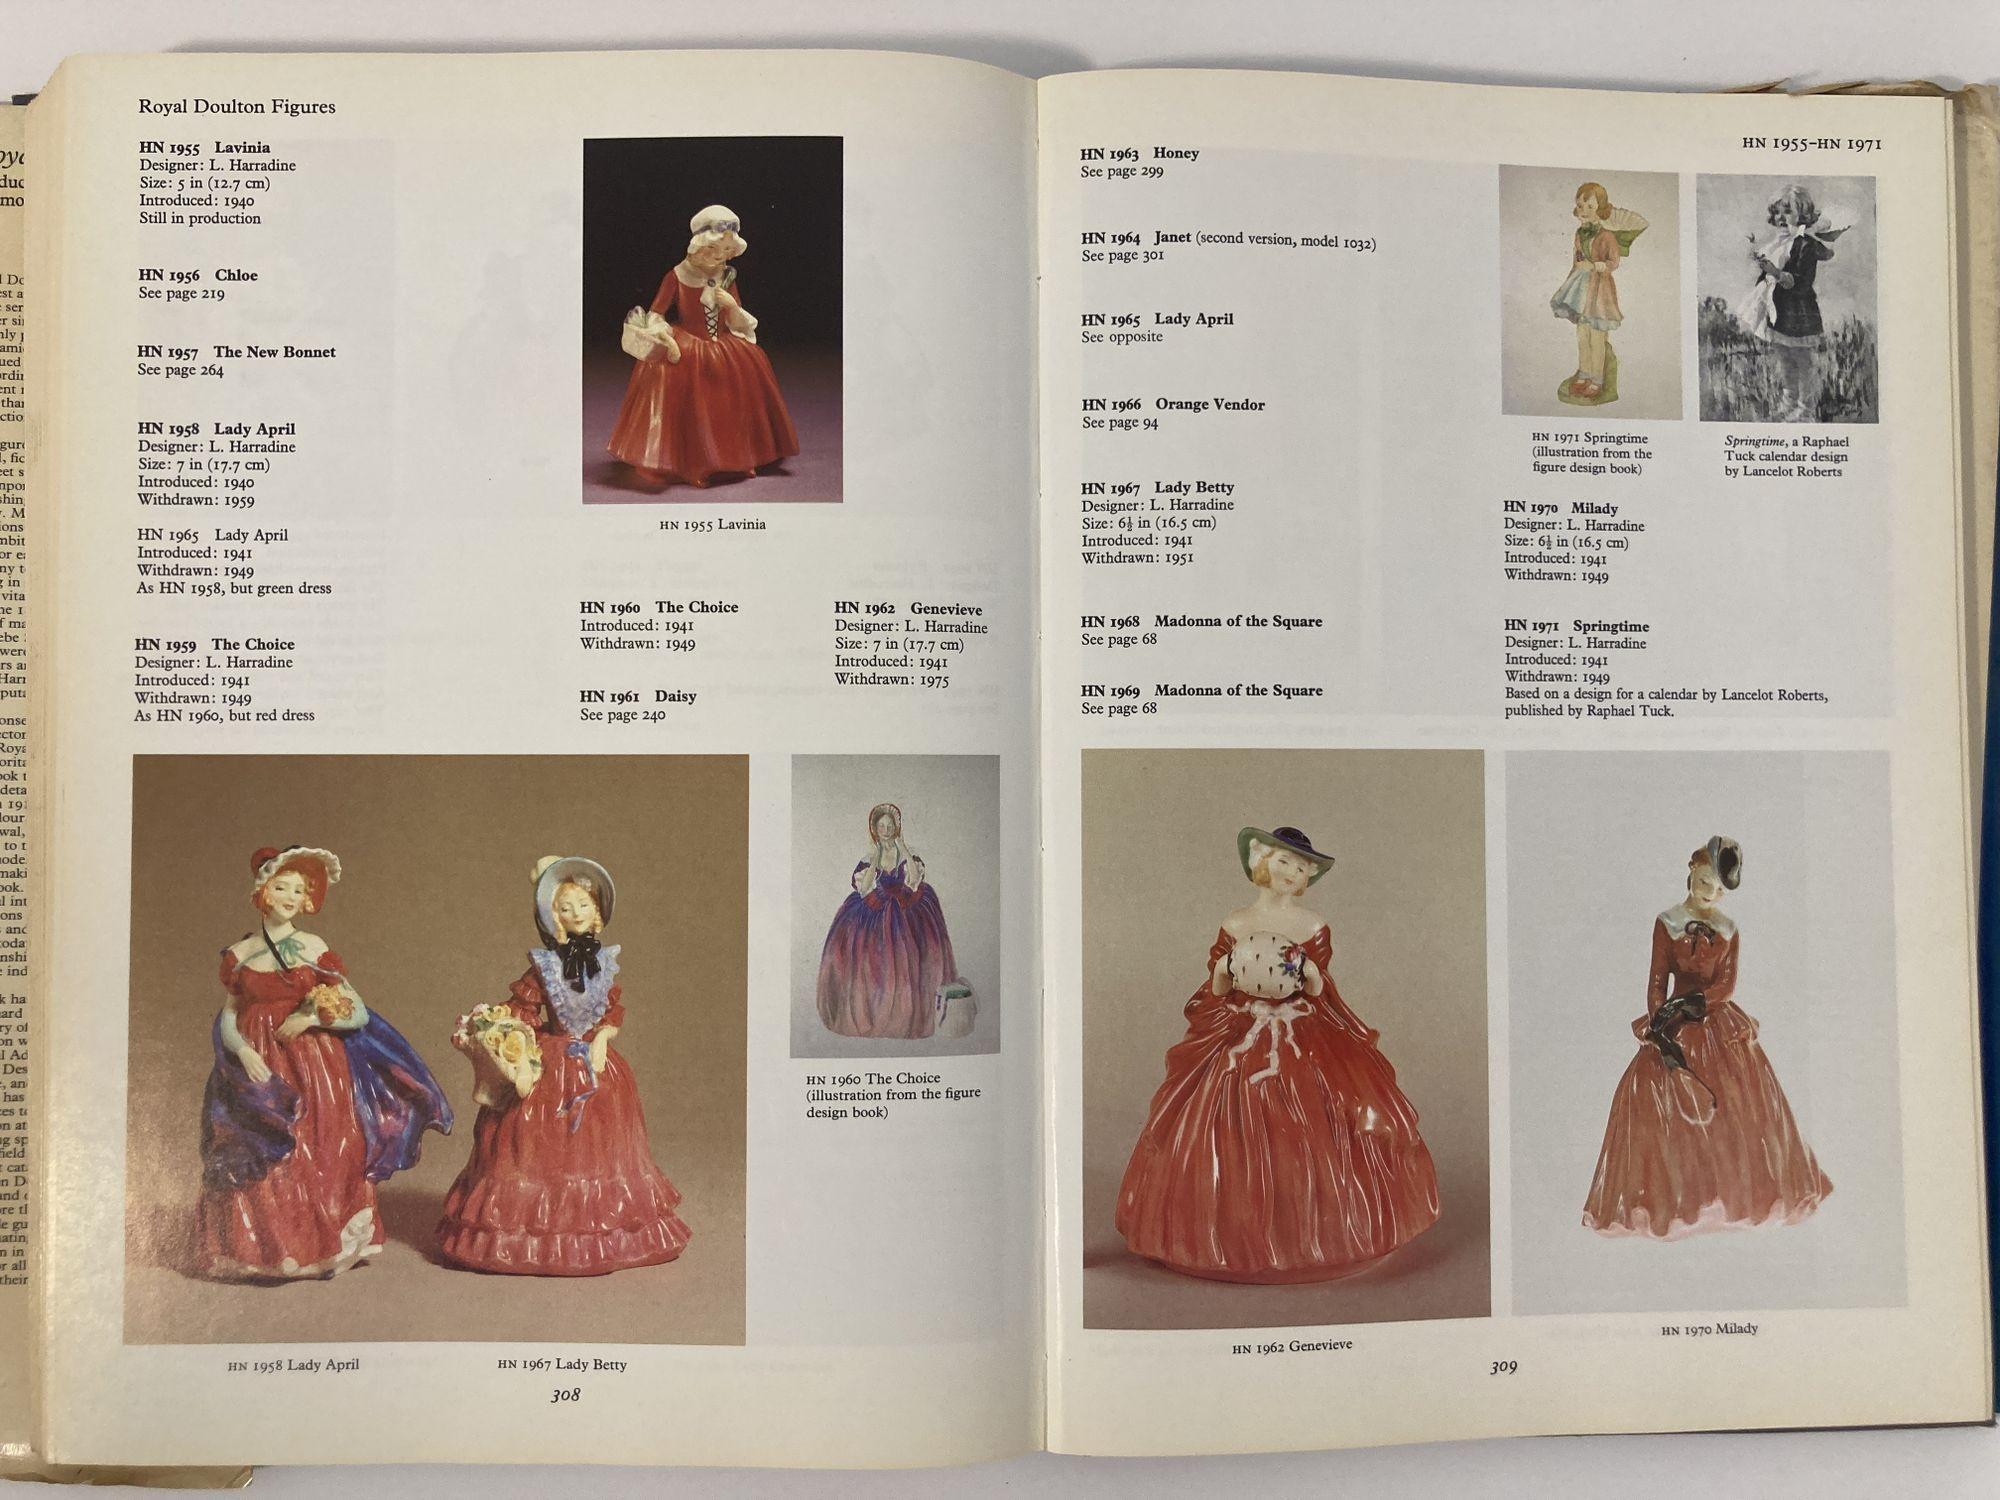 Royal Doulton Figures 1st Ed. Hardcover Book 1979 For Sale 4